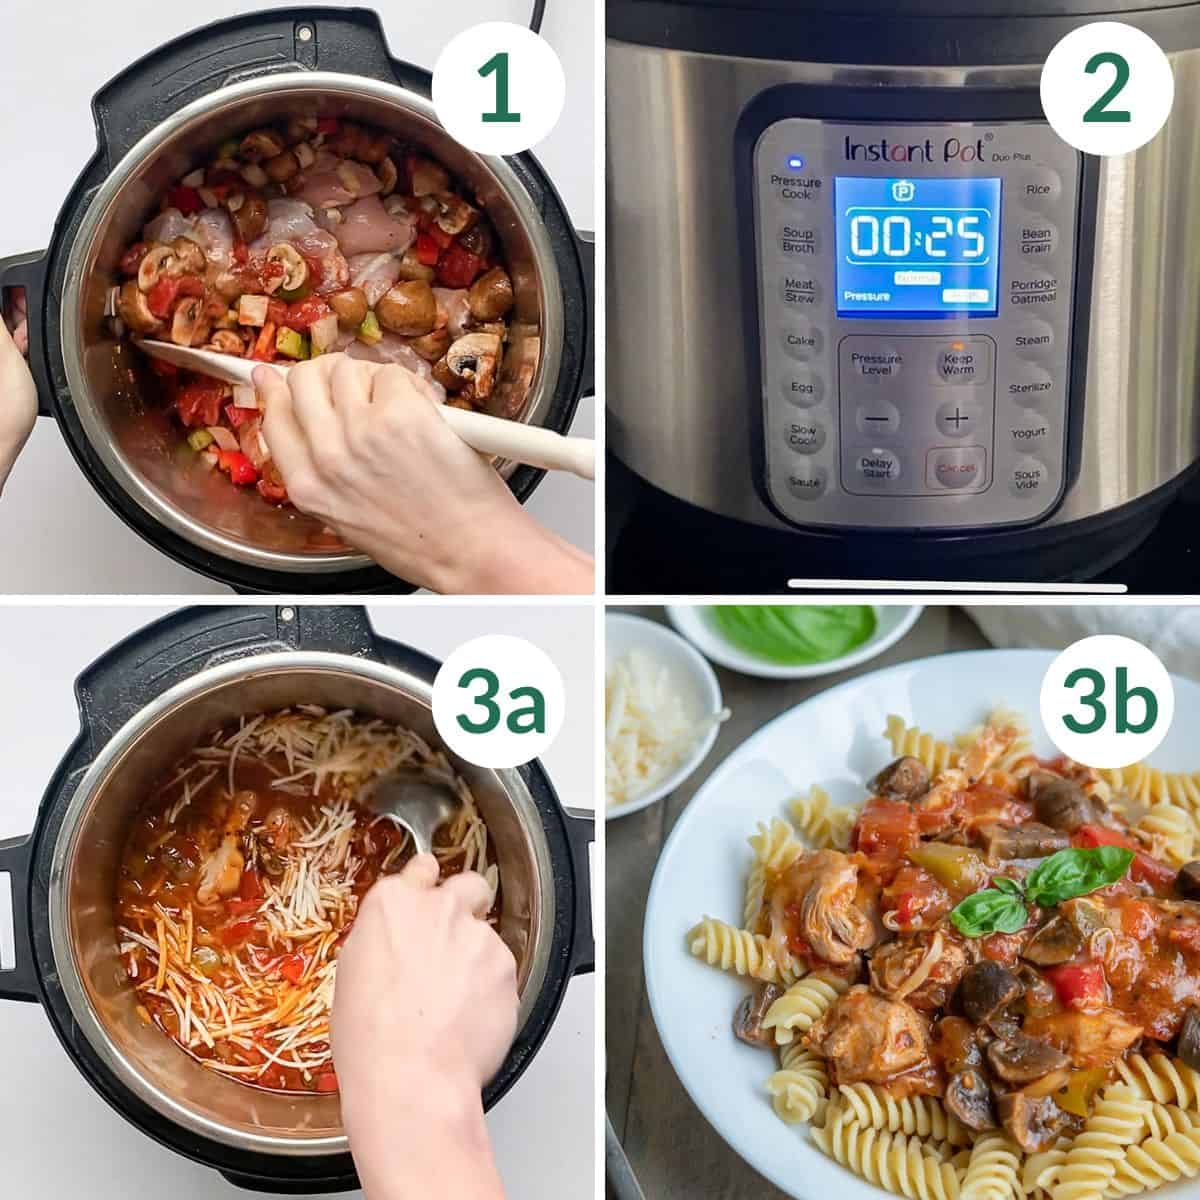 How to make instant pot chicken cacciatore including filling the instant pot, setting it for 25 minutes, stirring in the cheese and serving over pasta.